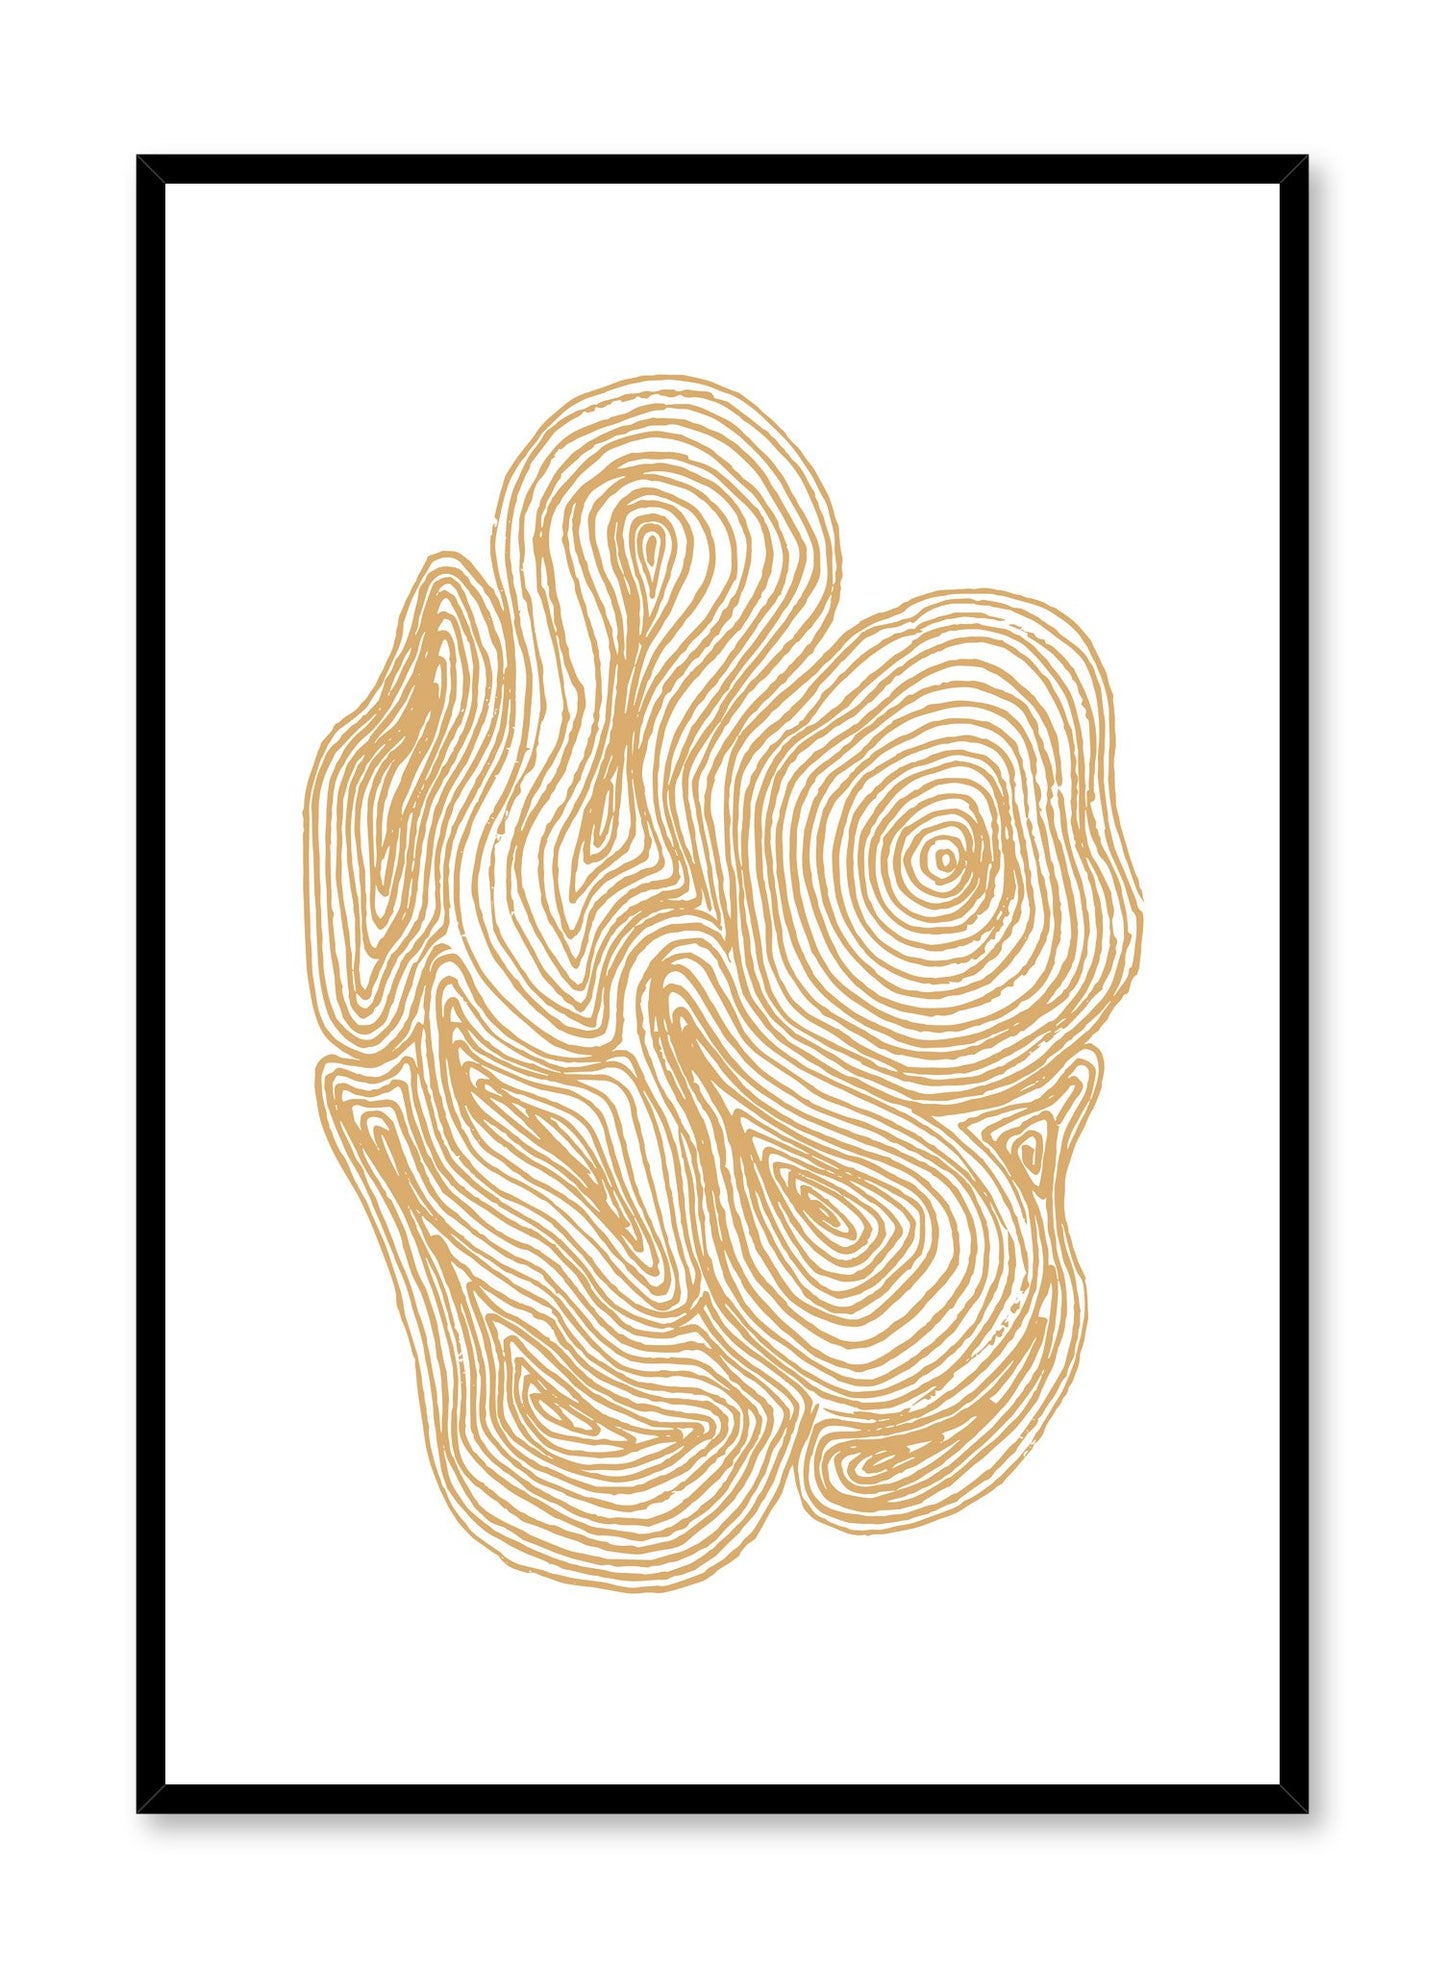 Modern minimalist abstract artwork by Opposite Wall with Cluster of Swirls in Yellow